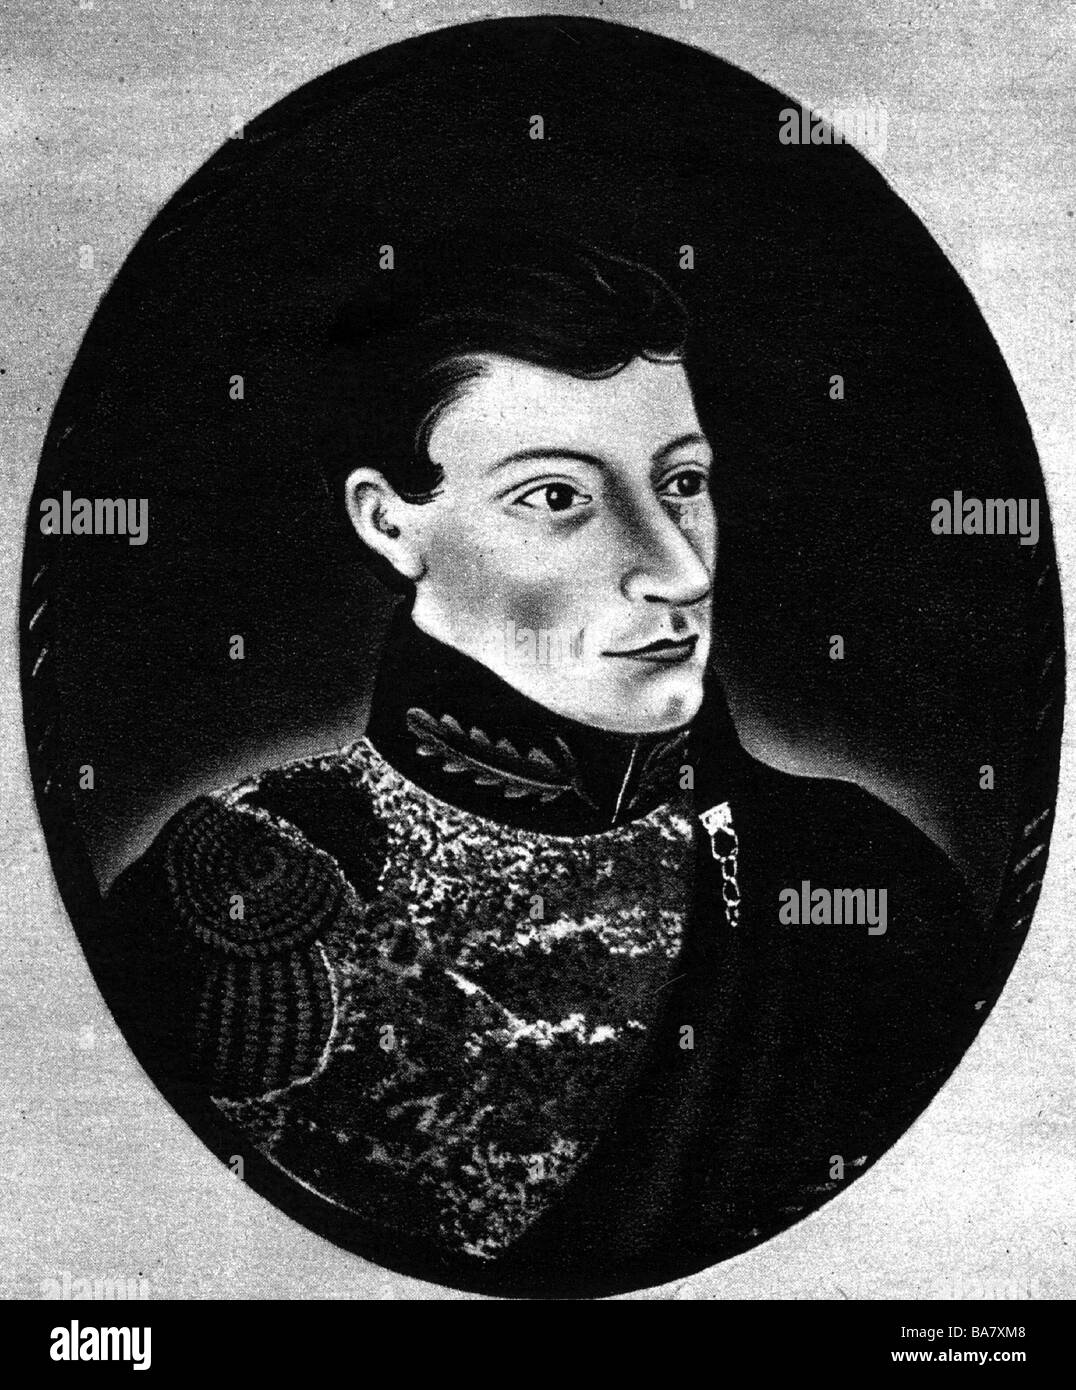 Siebold, Philipp Franz Balthasar von, 17.2.1796 - 18.10.1866, German physician, portrait, print after painting, Artist's Copyright has not to be cleared Stock Photo